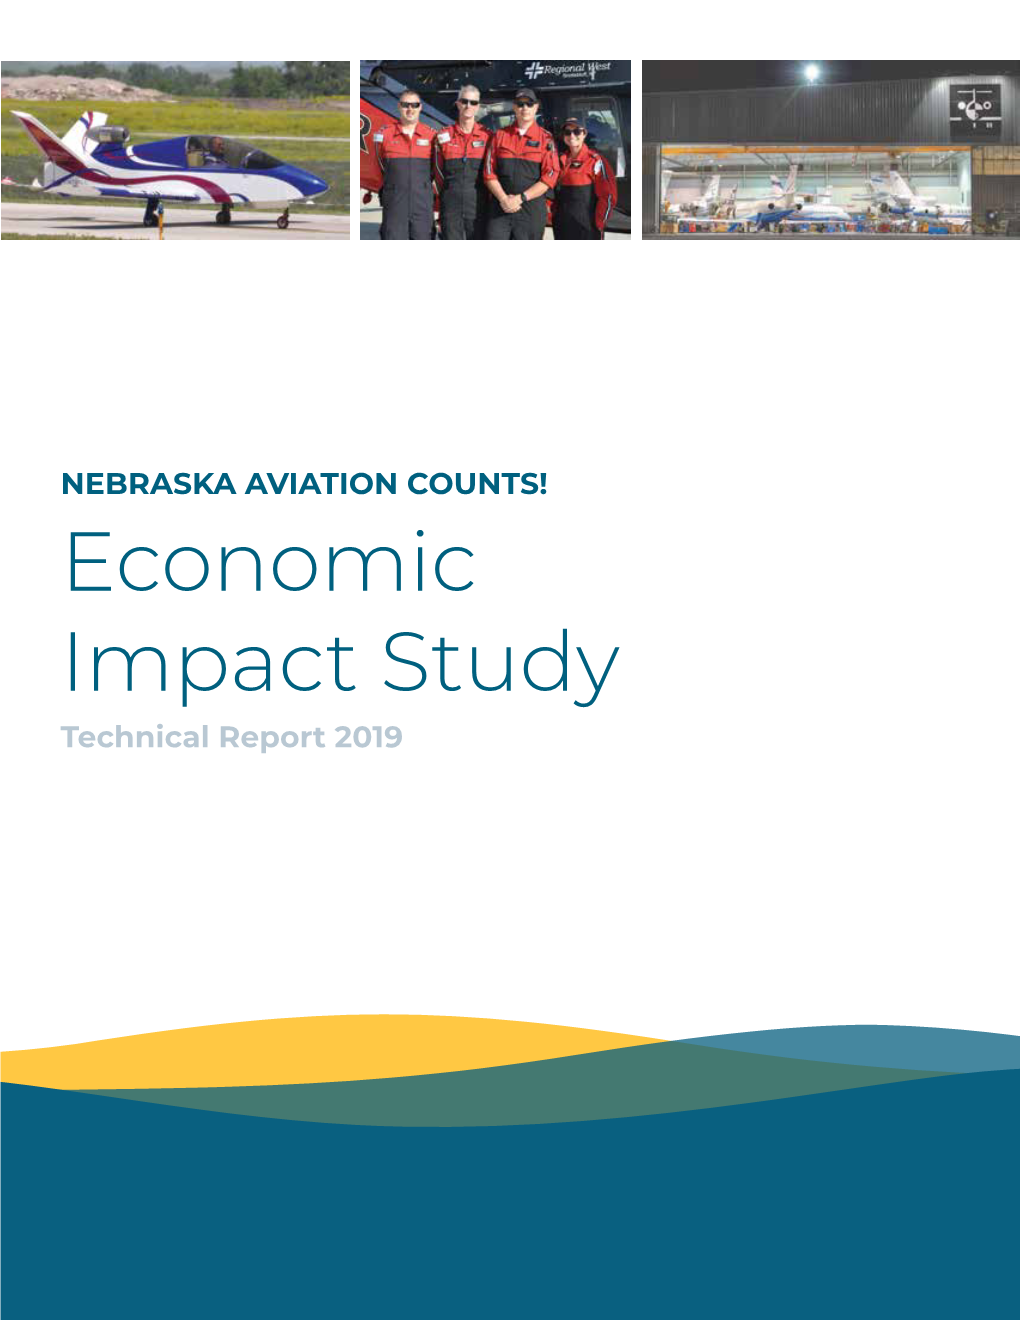 Economic Impact Study Technical Report 2019 Table of Contents